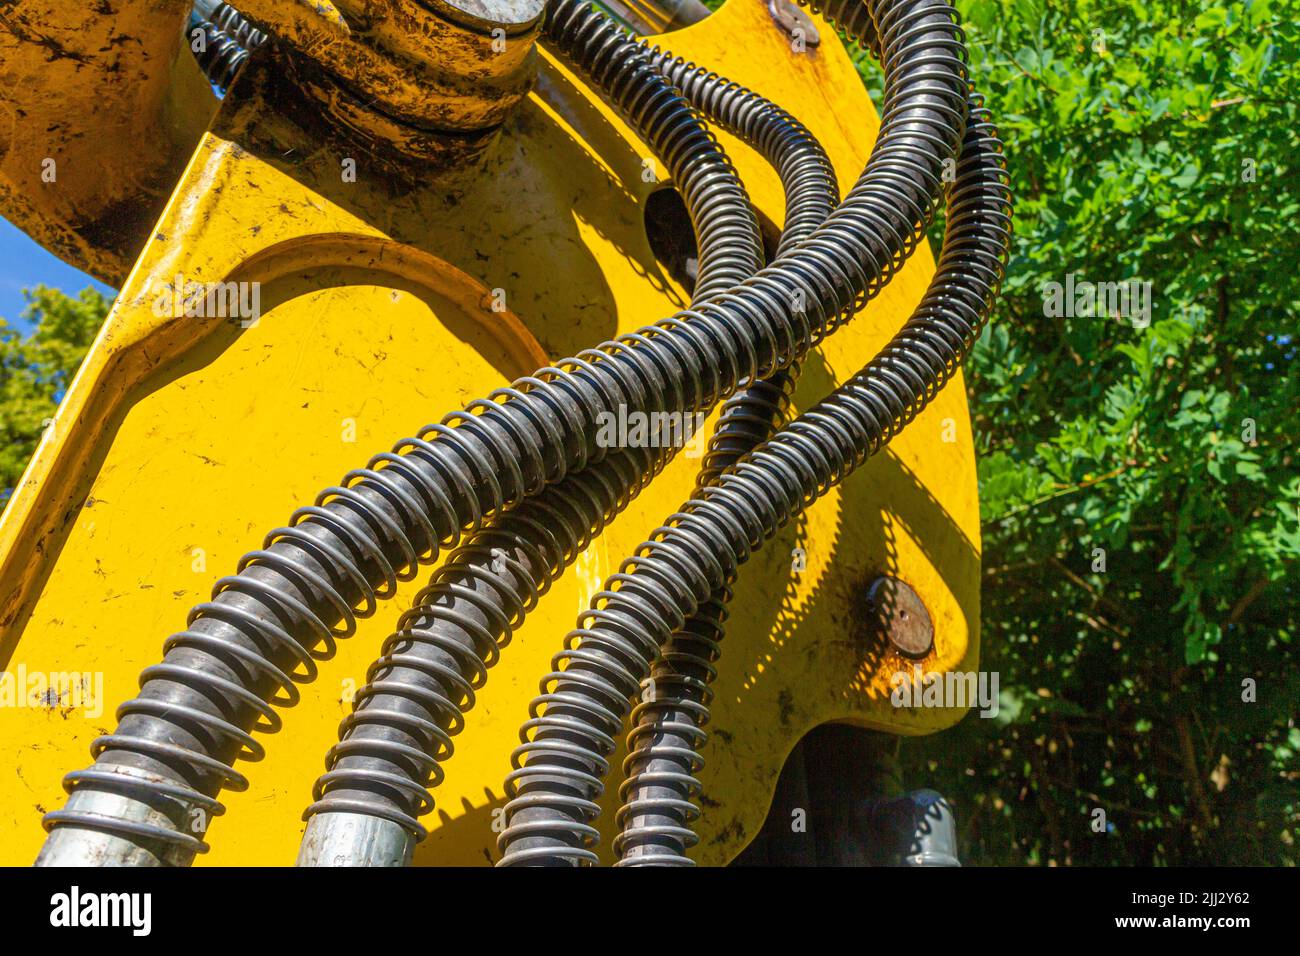 Hydraulic hoses on the bucket arm of a wheel loader for power transmission to the excavator bucket Stock Photo